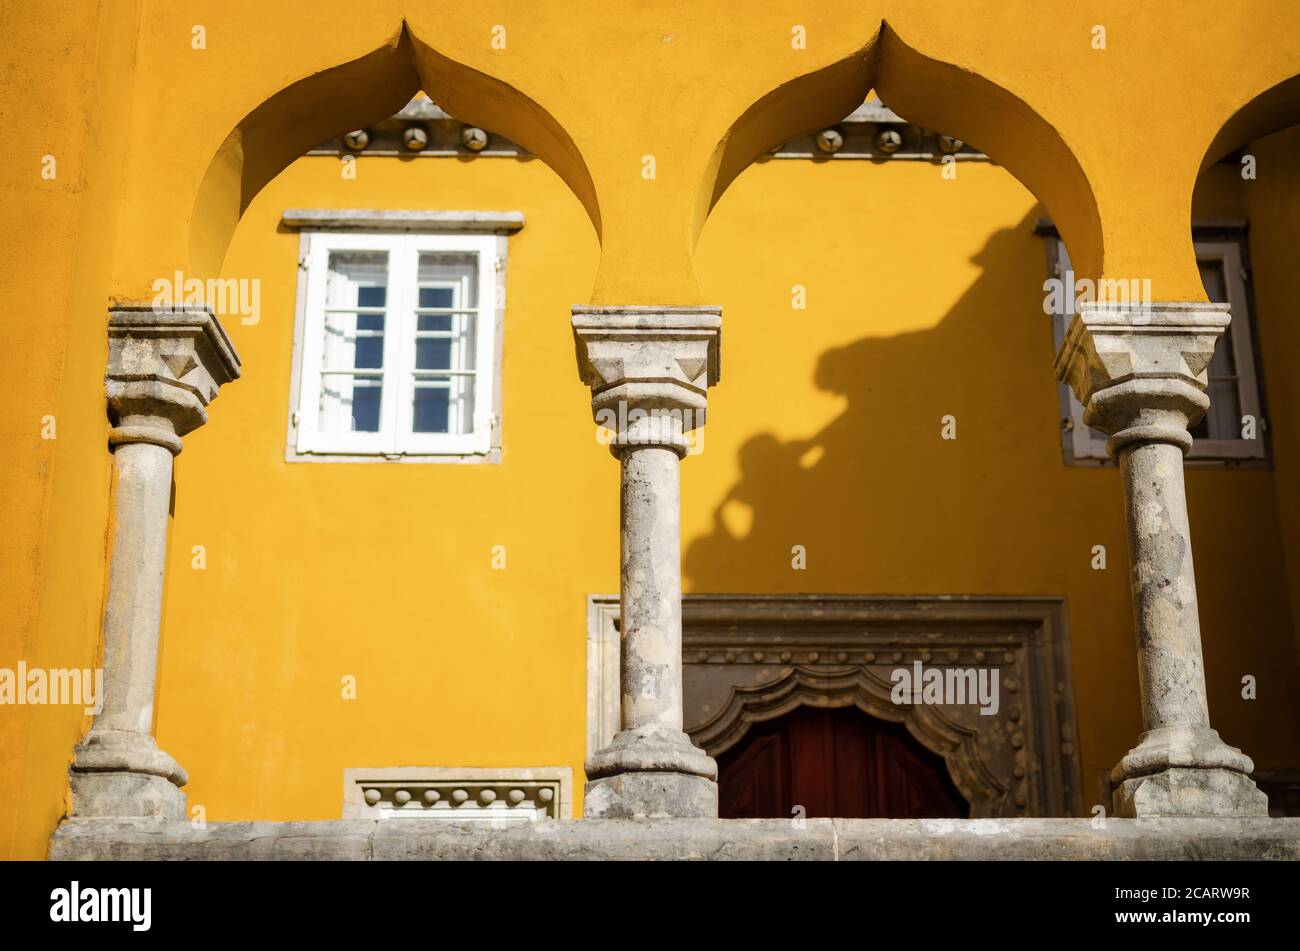 Sintra, Portugal - February 4, 2019: Exterior view of the Pena Palace, famous colorful castle in Sintra, Portugal, on february 4, 2019. Detail of the Stock Photo